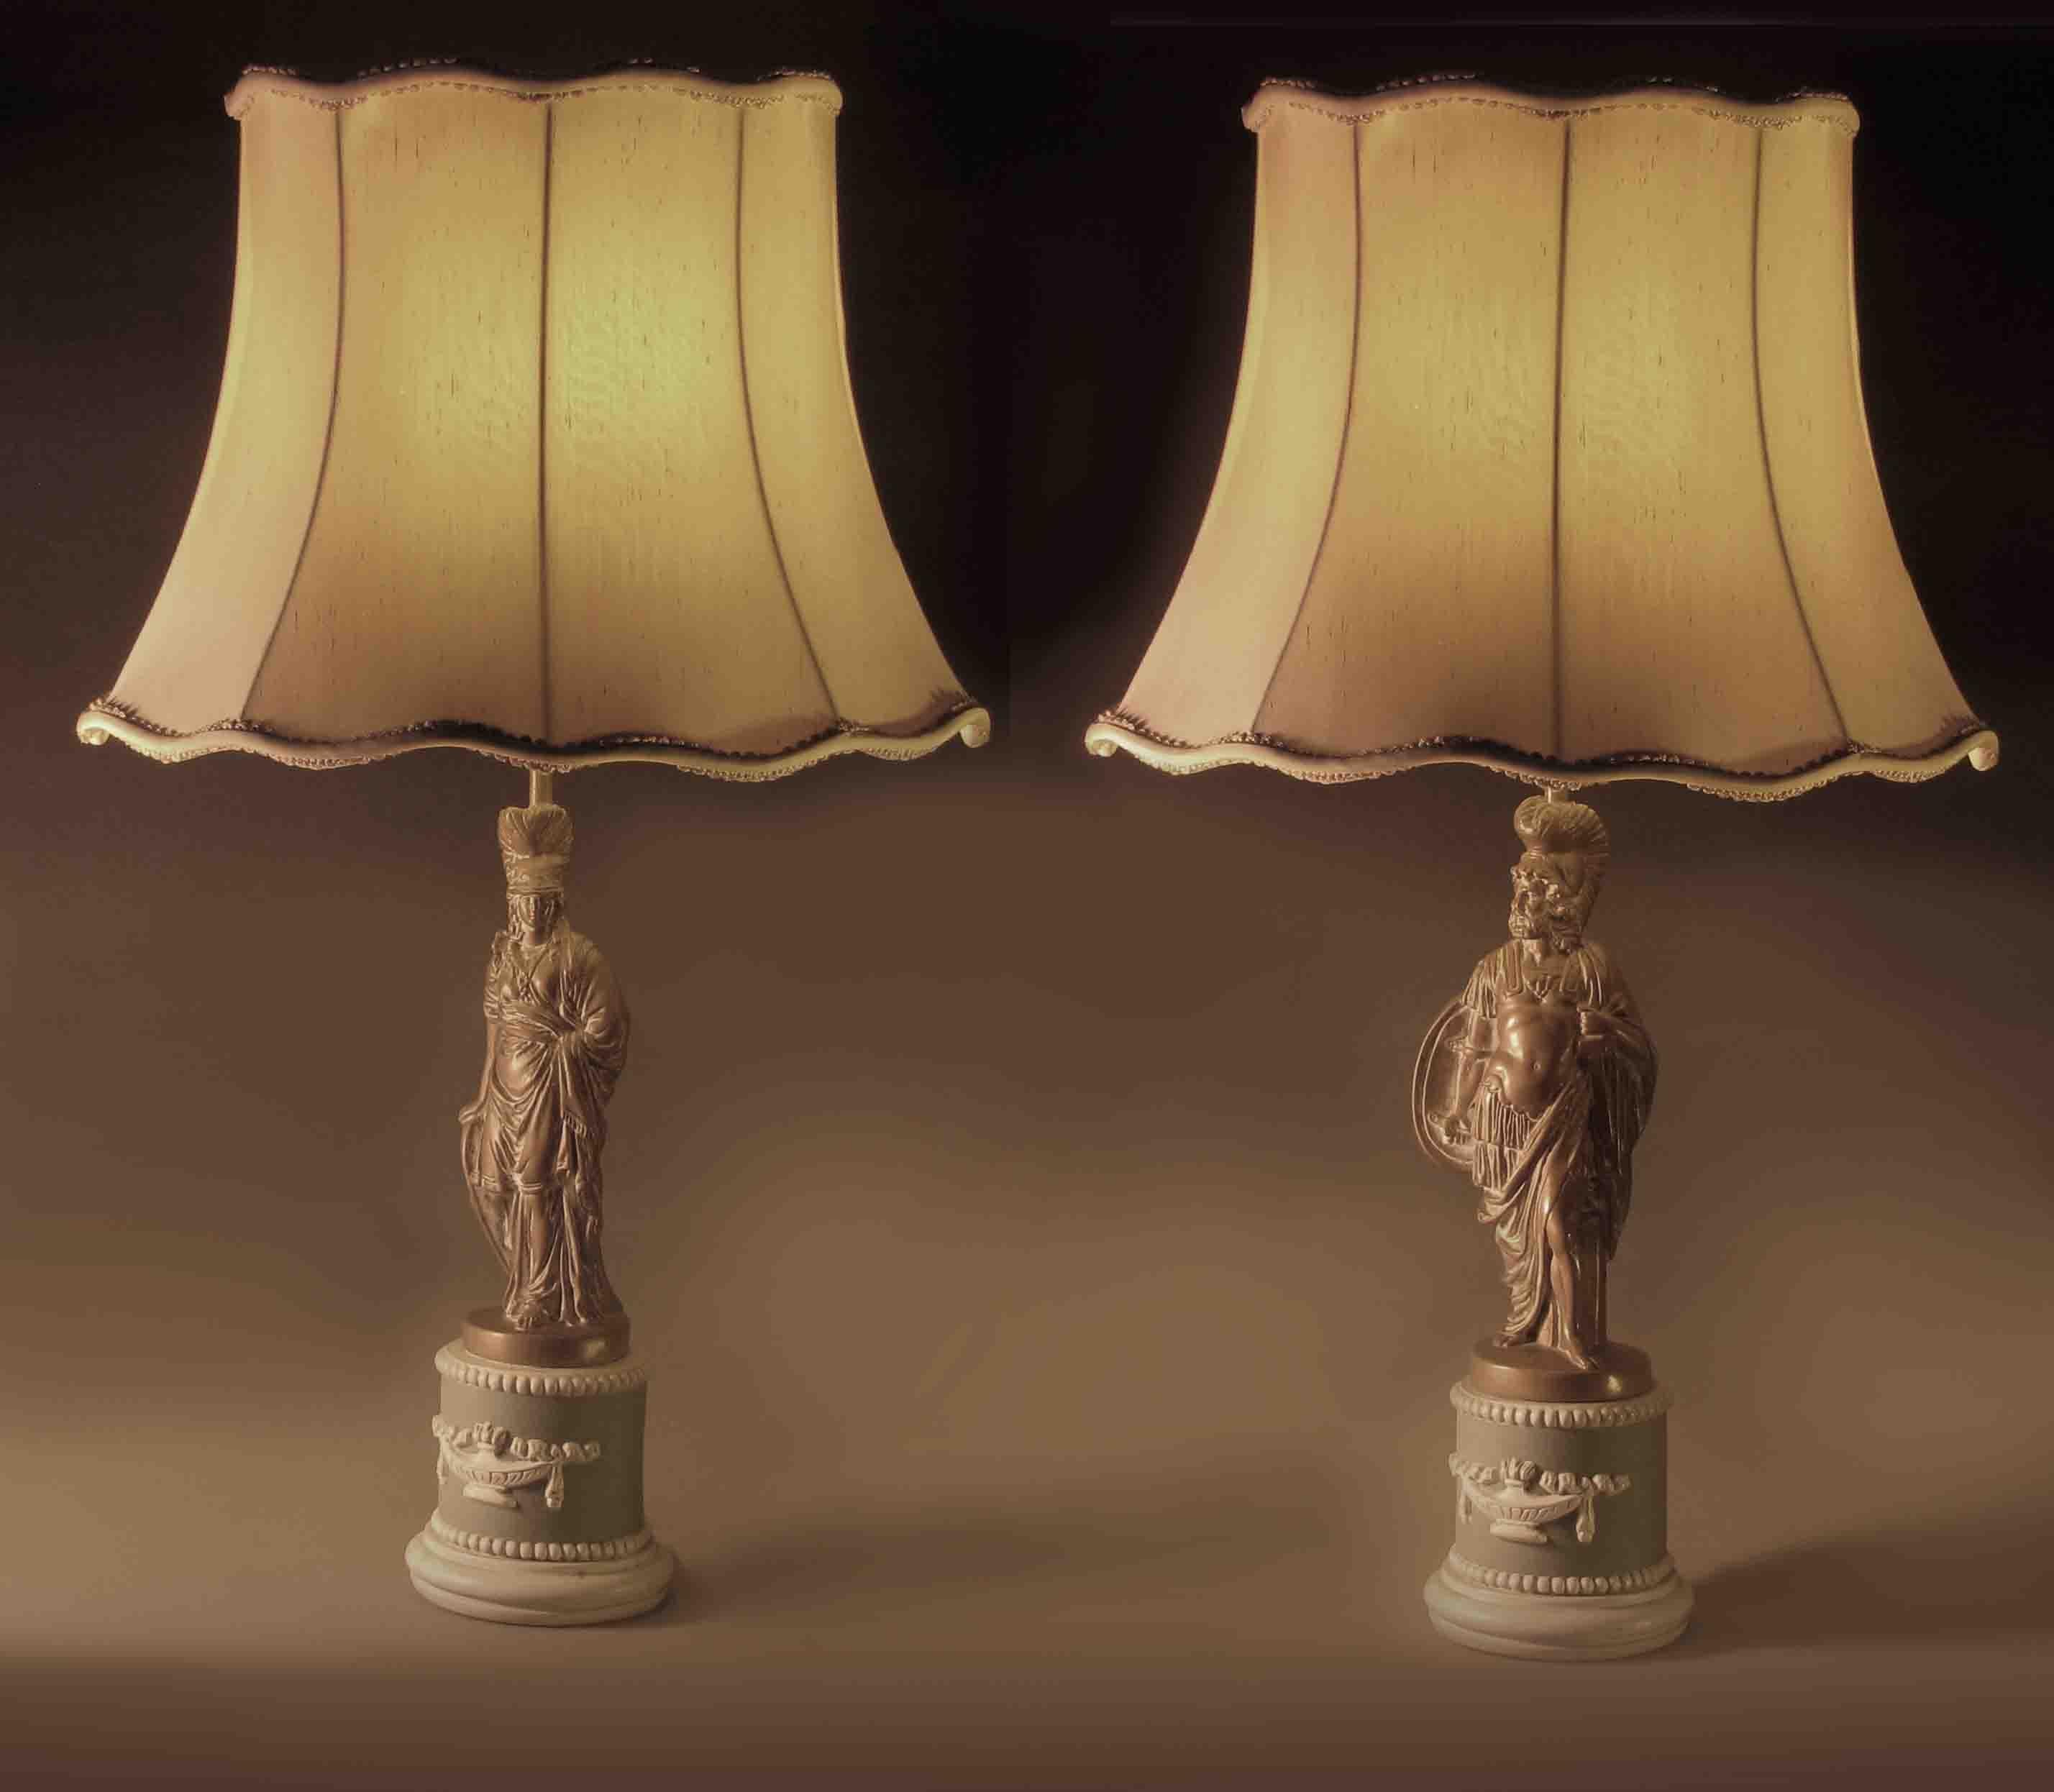 20th Century Pair of Patinated Plaster Neoclassical Figural Table Lamps by Sculptureline N.Y. For Sale